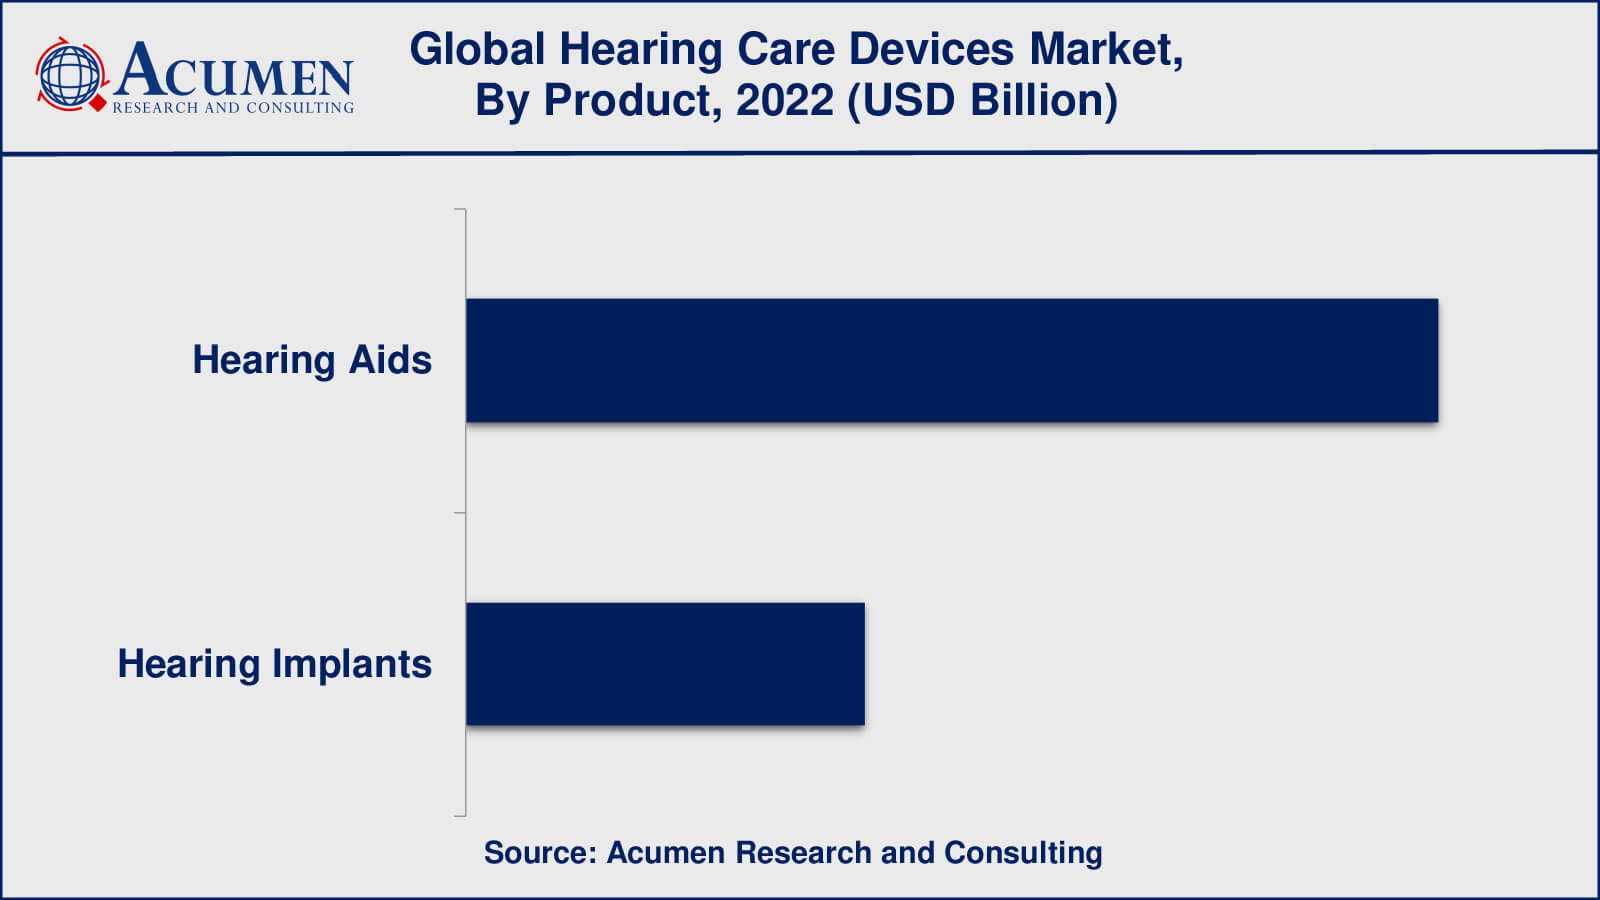 Hearing Care Devices Market Drivers